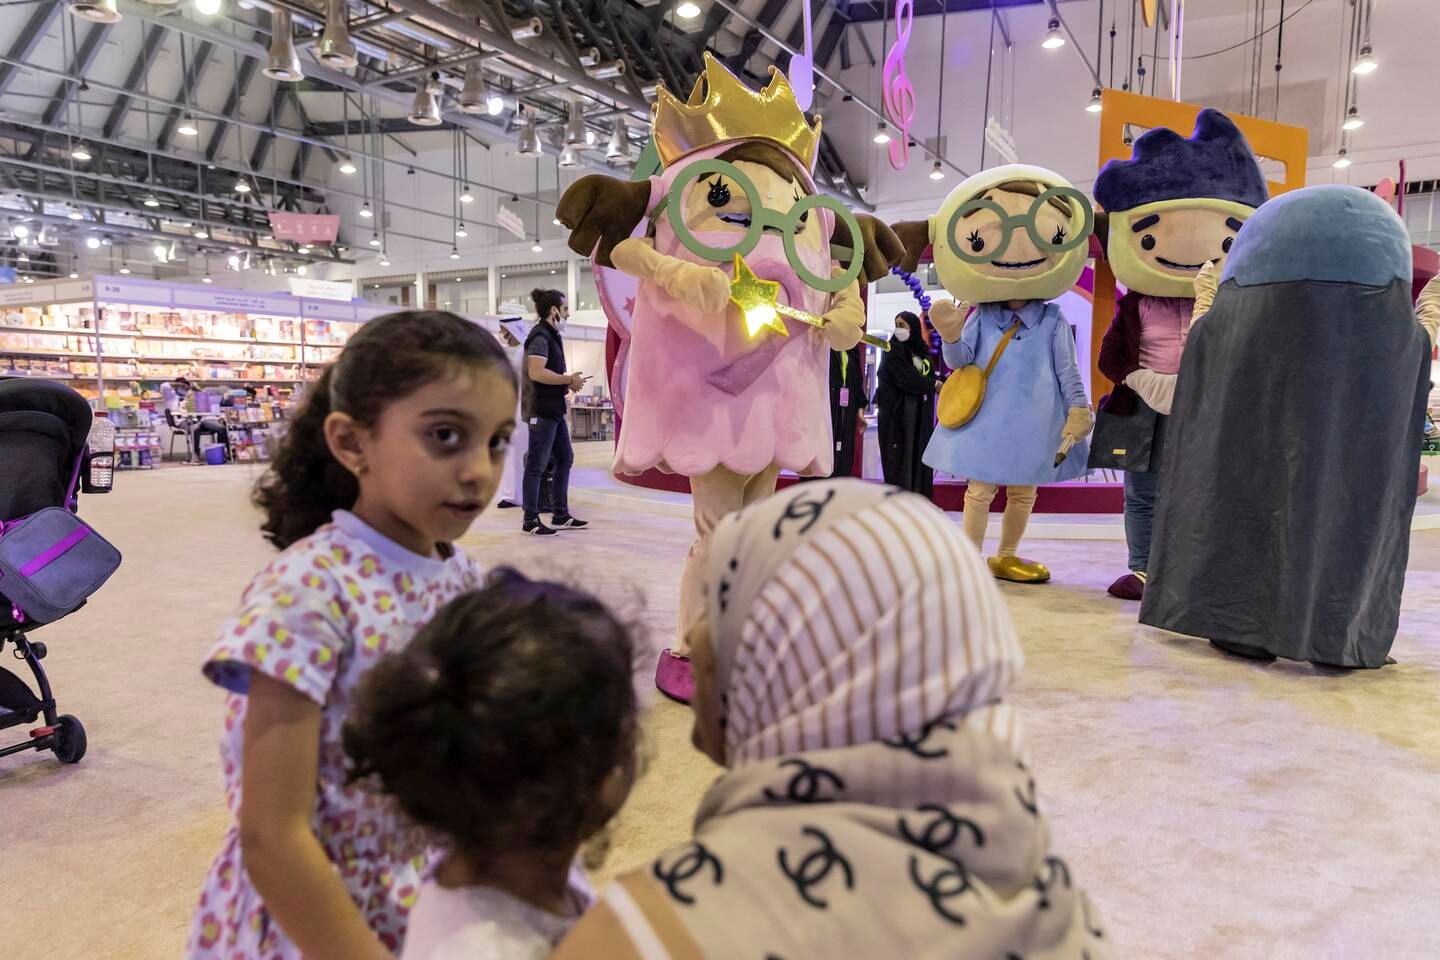 The Sharjah Children's Reading Festival is taking place at the Expo Centre Sharjah under the theme Create Creativity. Antonie Robertson / The National
